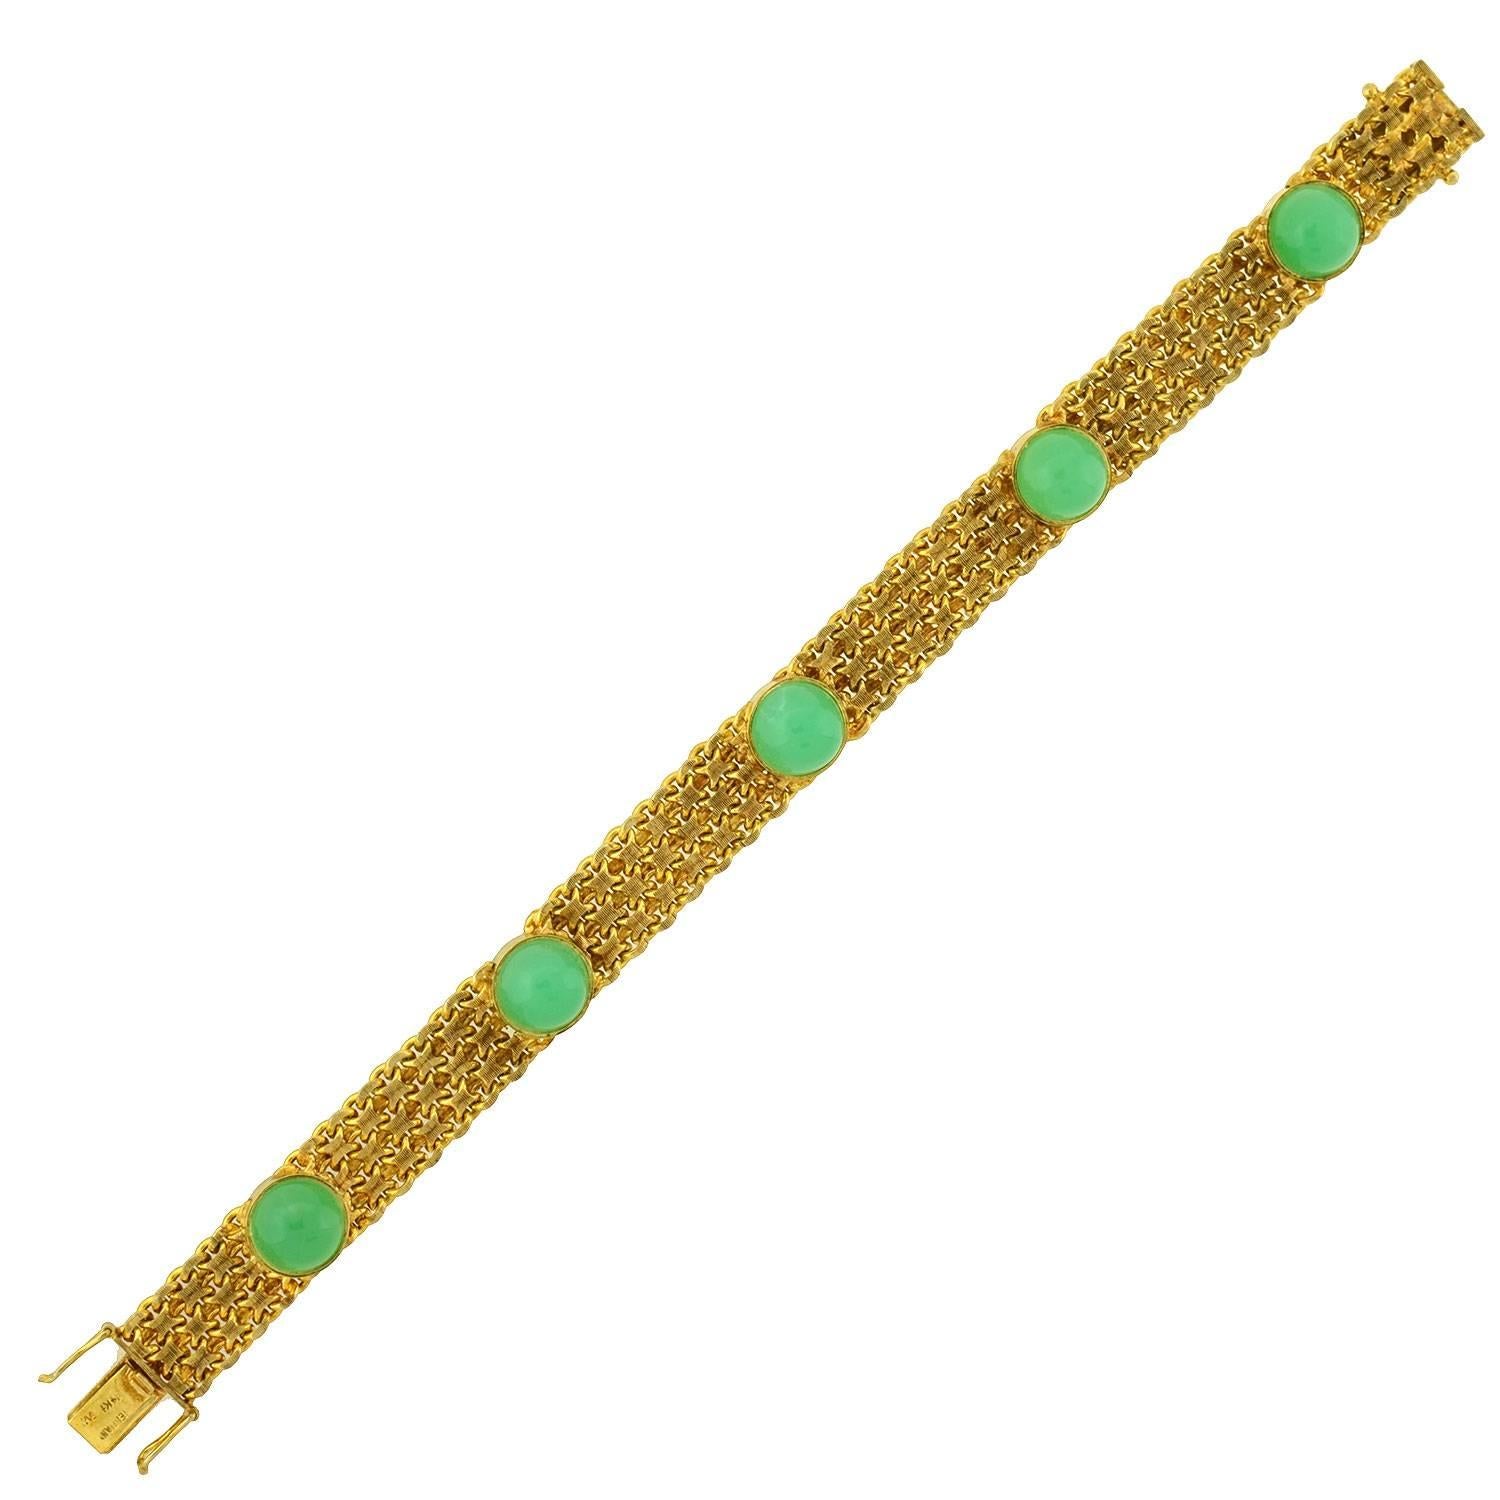 A fabulous vintage bracelet from the 1960s! This stylish piece is crafted in vibrant 14kt gold, forming a flexible line bracelet. A series of interlocking links create a stylish chainmail base, which wraps comfortably around the wrist. Lining the